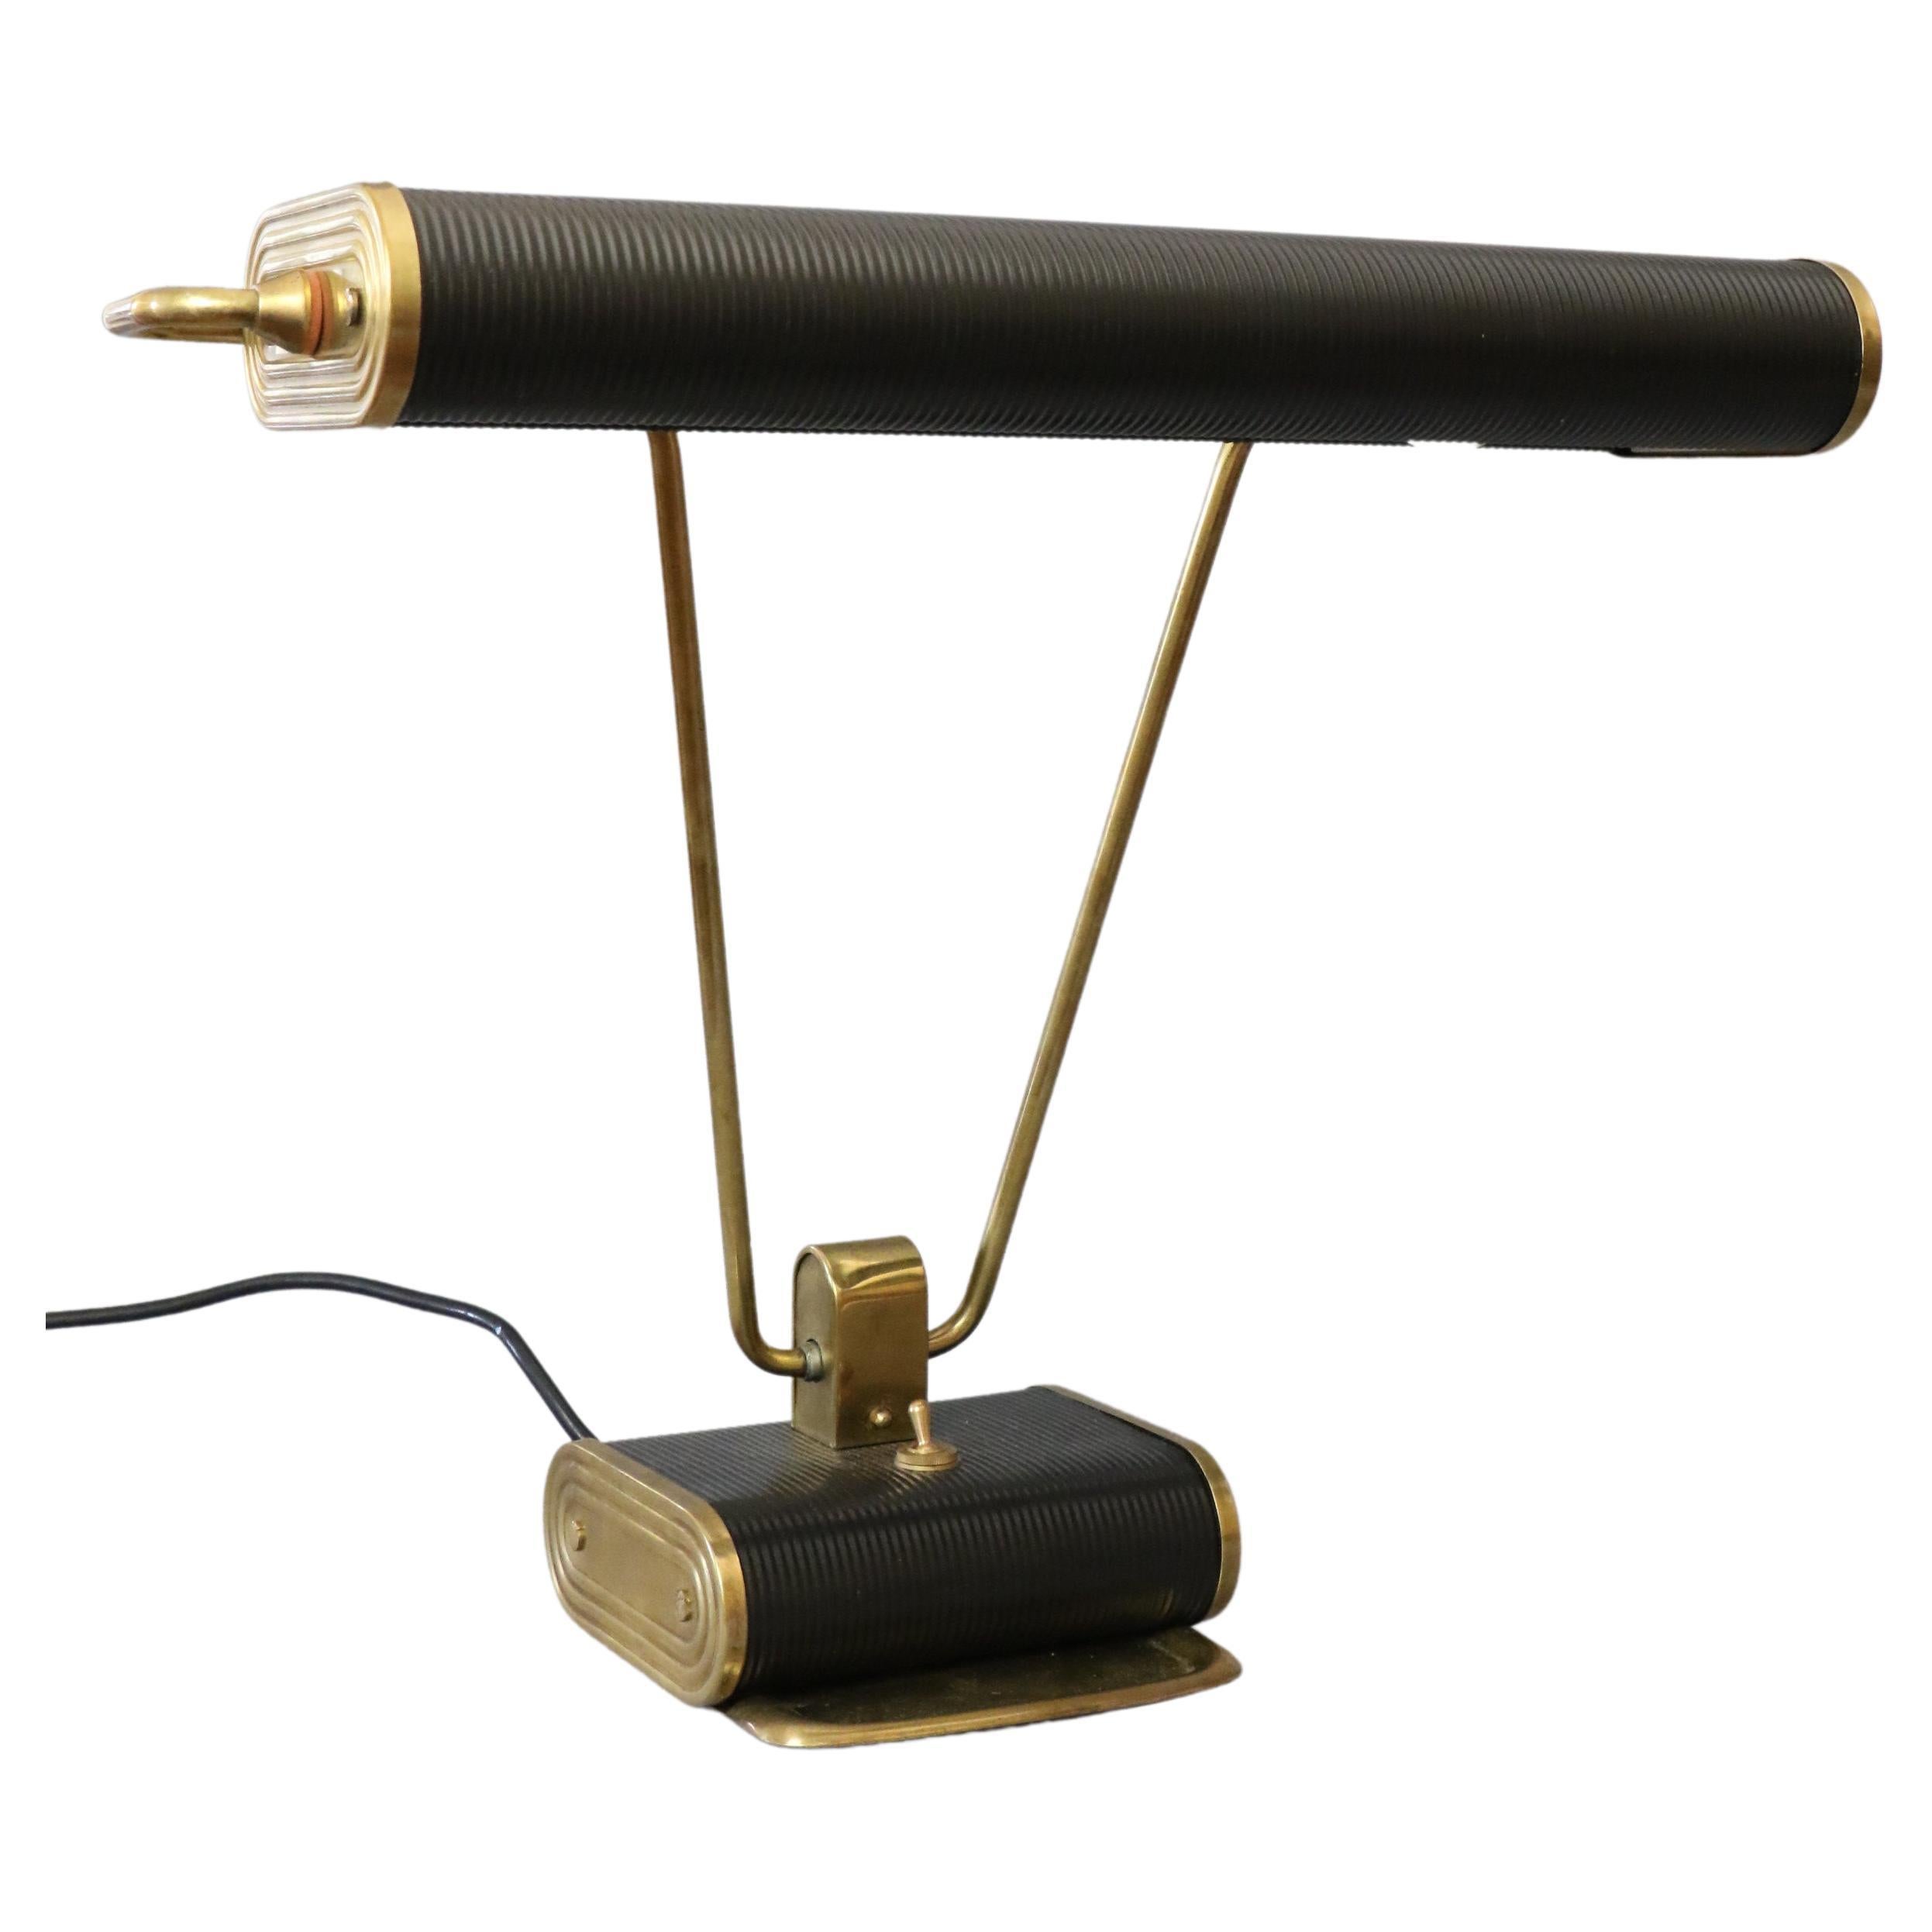 Eileen Gray midcentury desk lamp for Jumo era Corbusier Perriand, 1950s

Iconic model of the House Jumo, it is the model n°71 first edition circa 1950. It is attributed to the Irish designer Eileen Gray.
The lamp is in black lacquered folded sheet